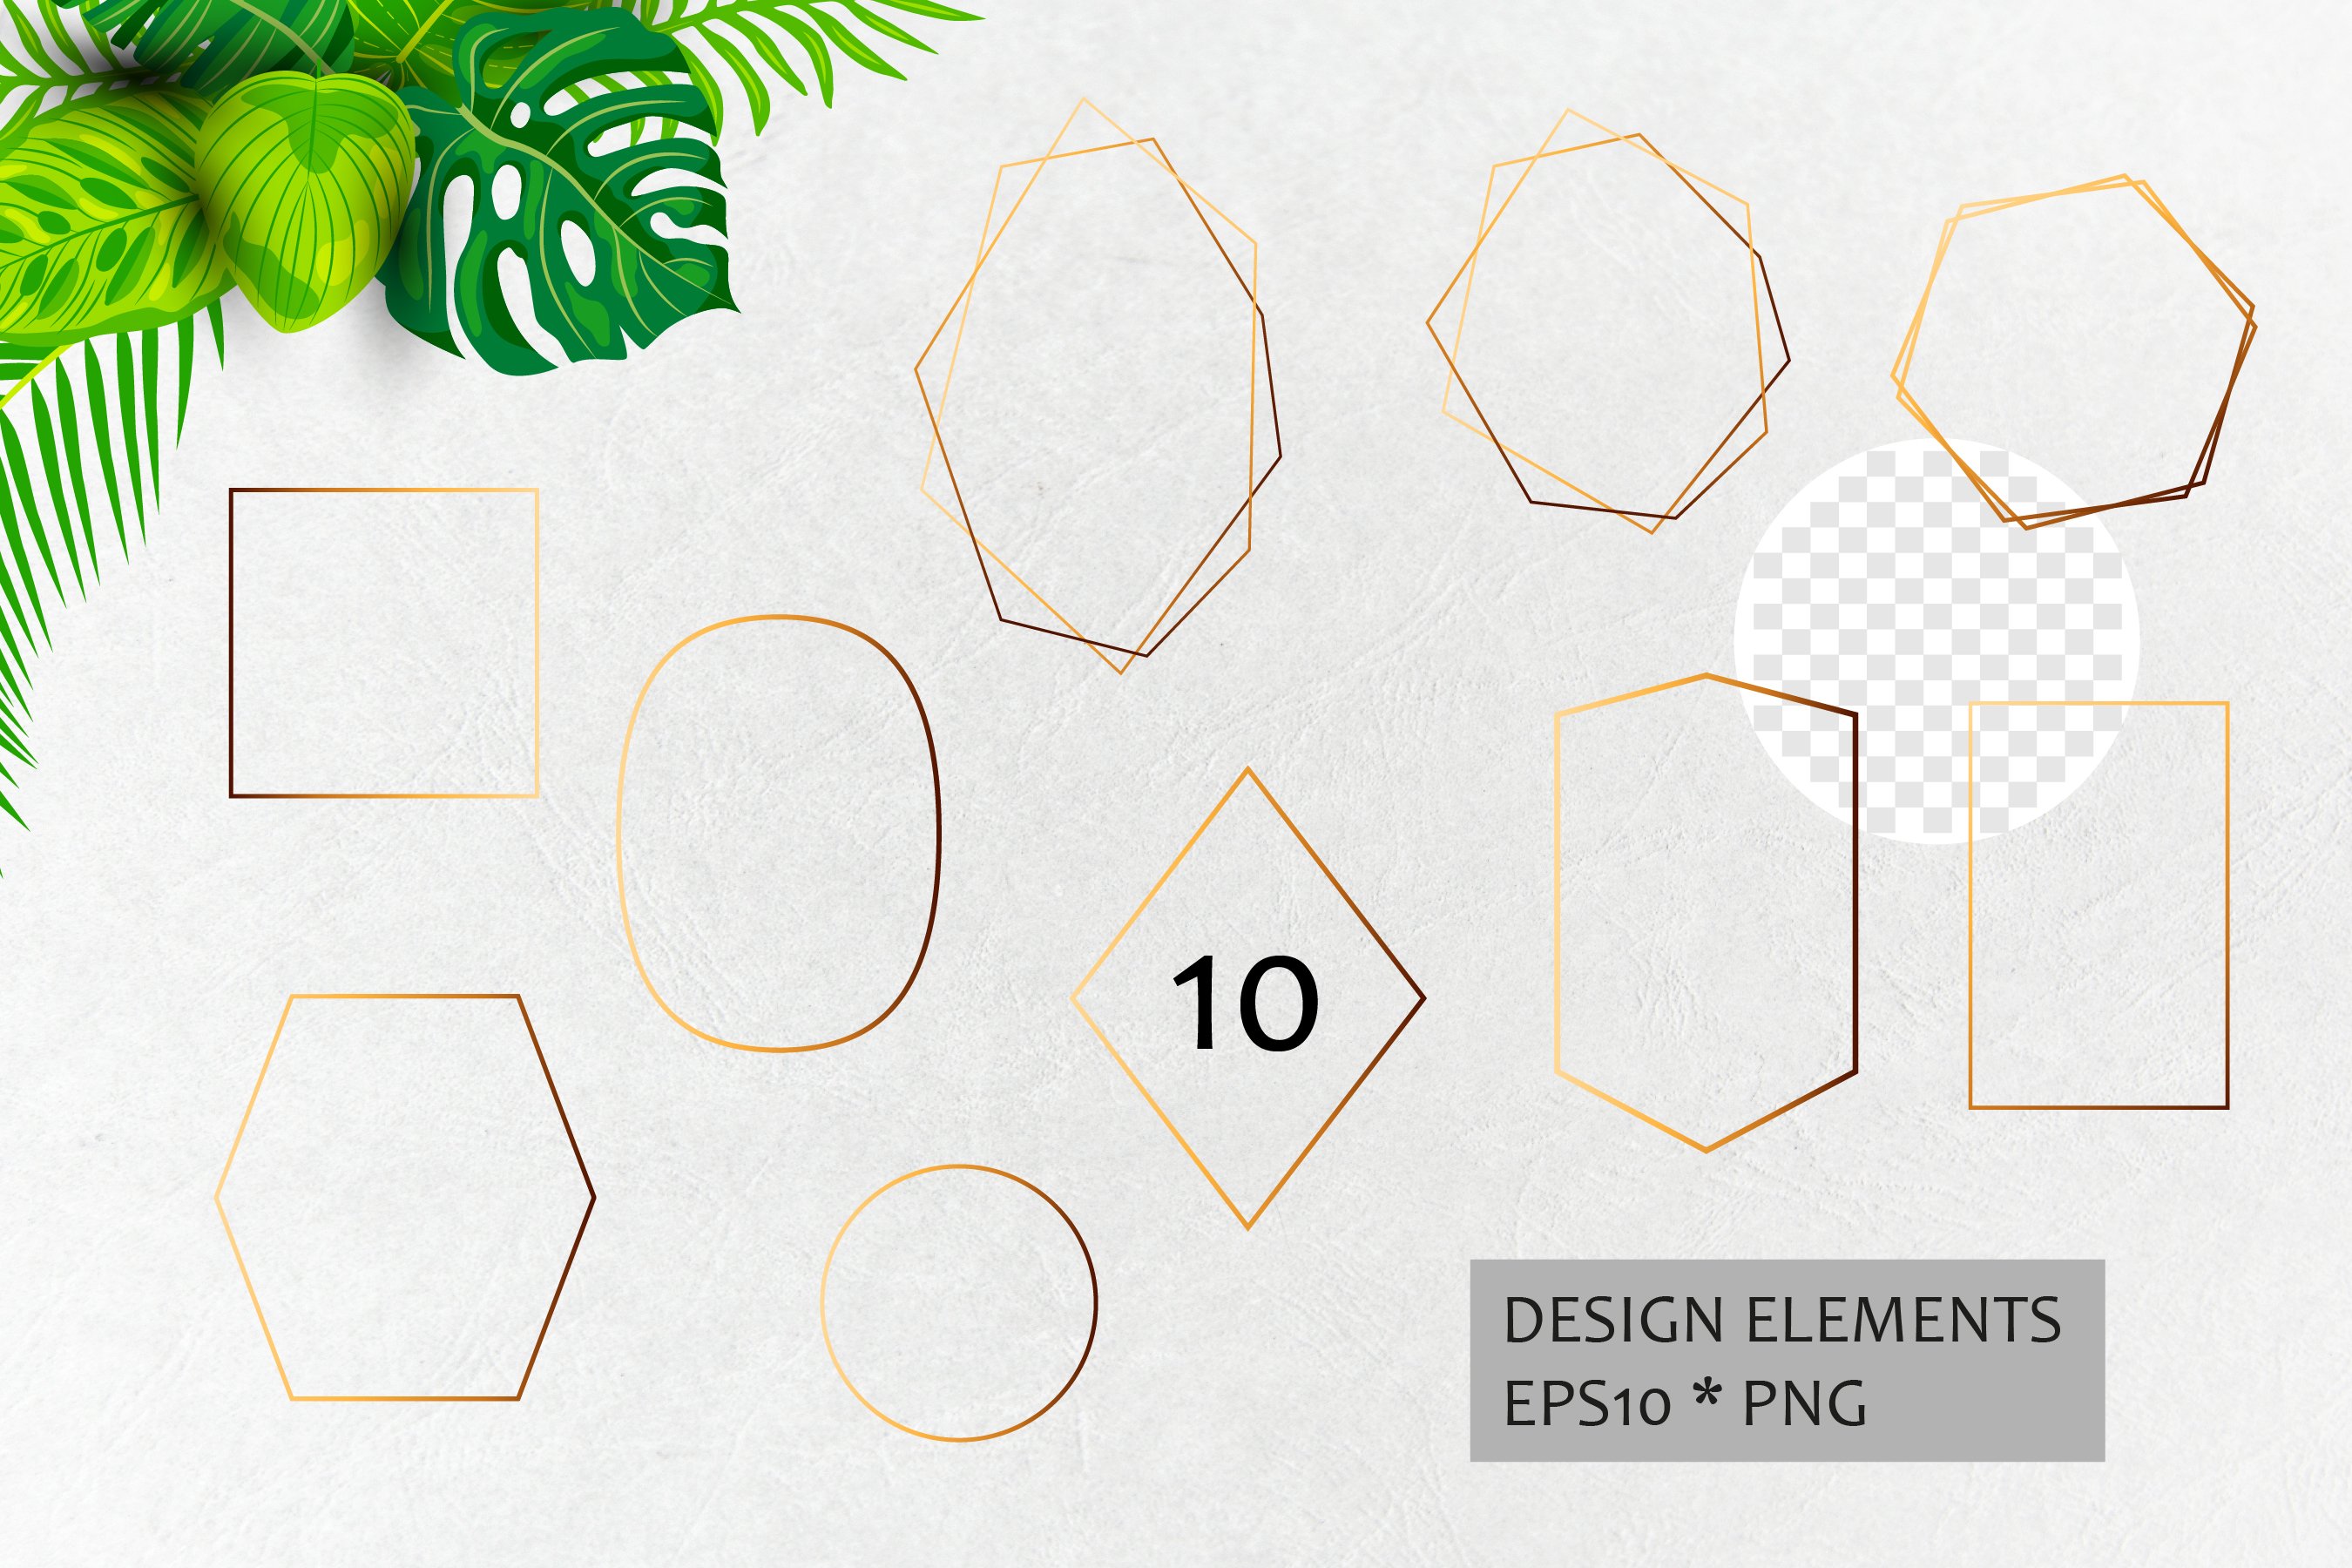 Set of golden geometric shapes and plants on a white background.